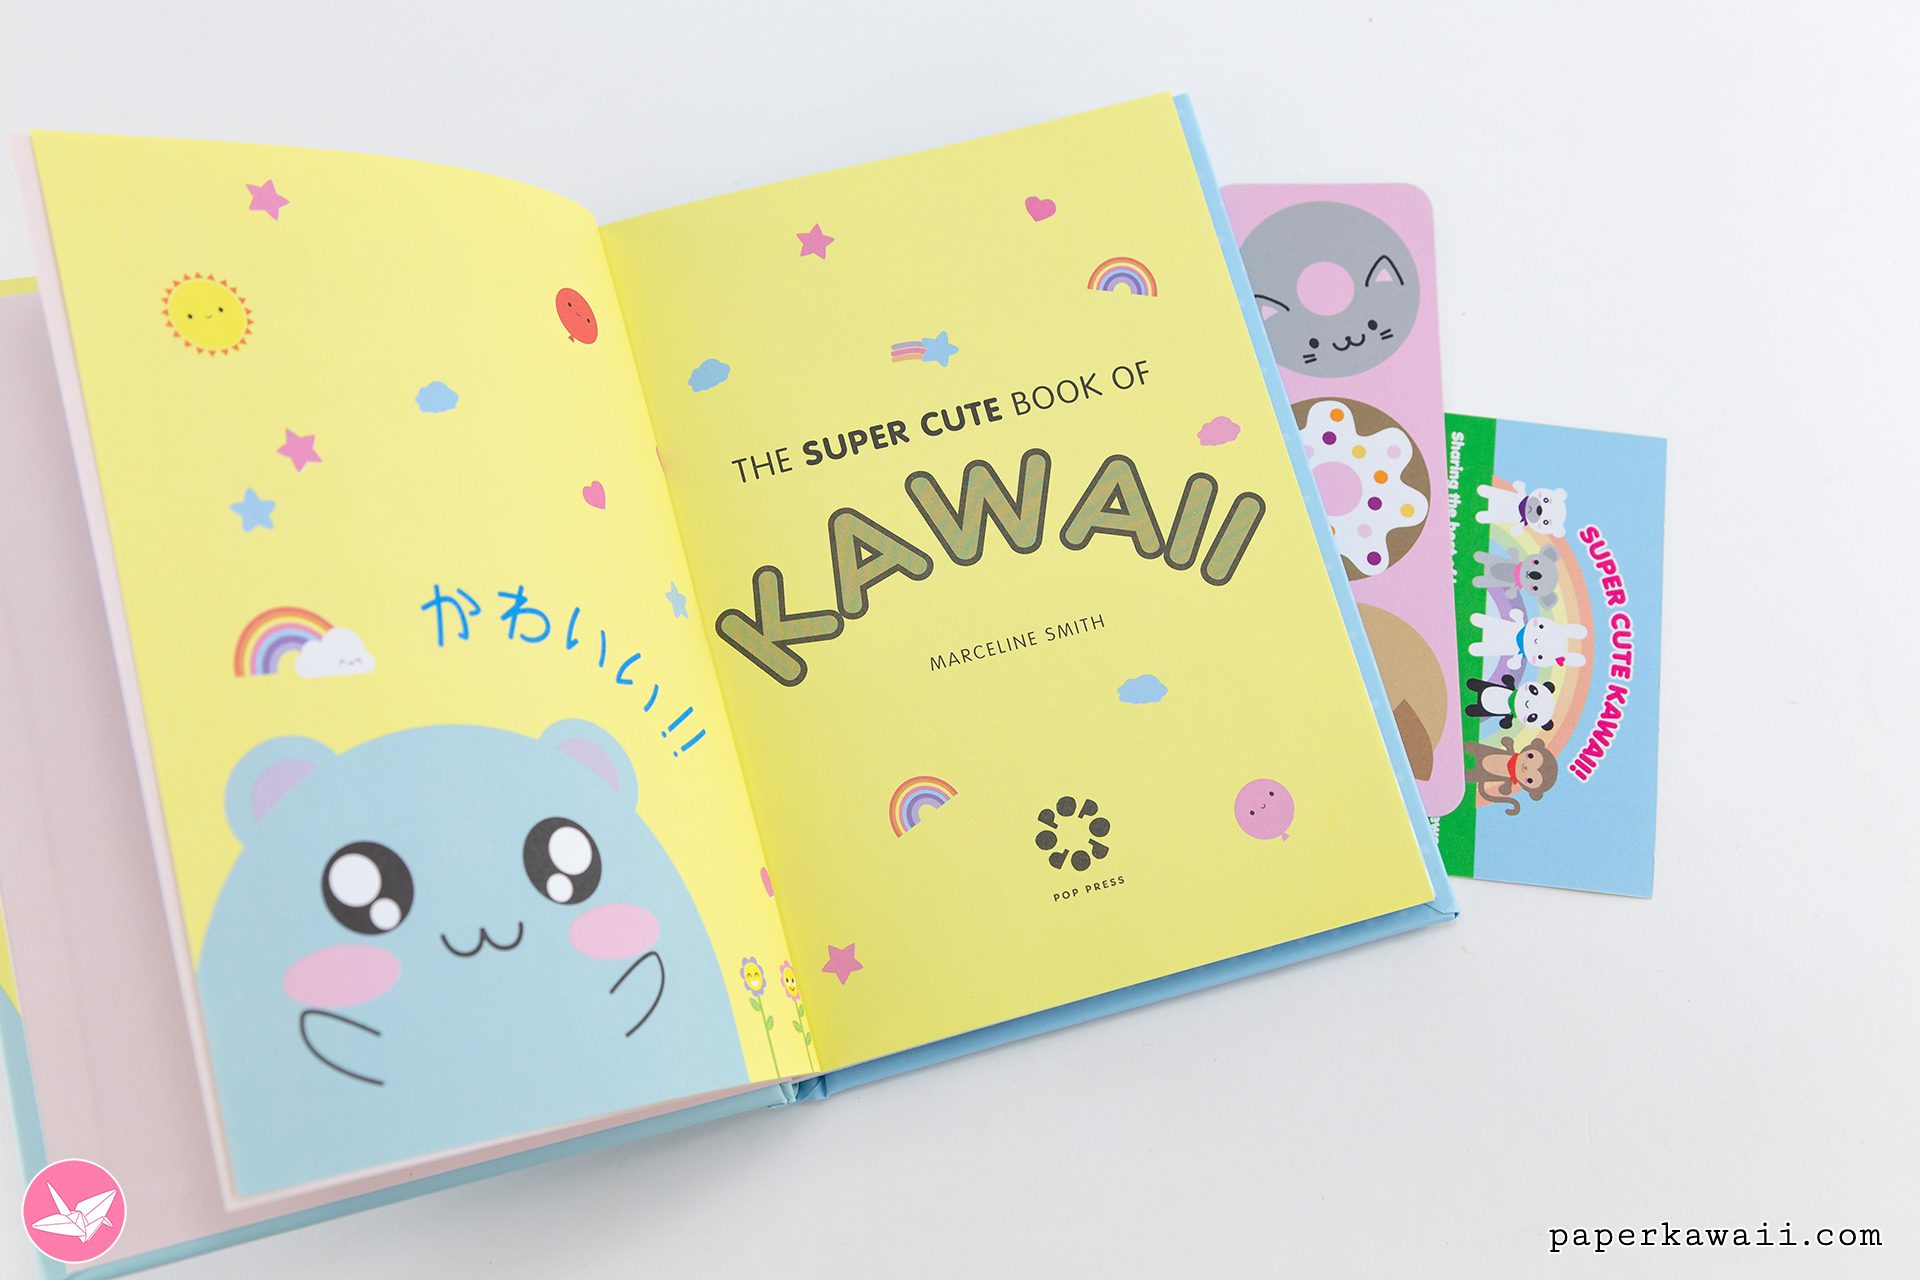 The Super Cute Book Of Kawaii Marceline Smith Review Paper Kawaii 05